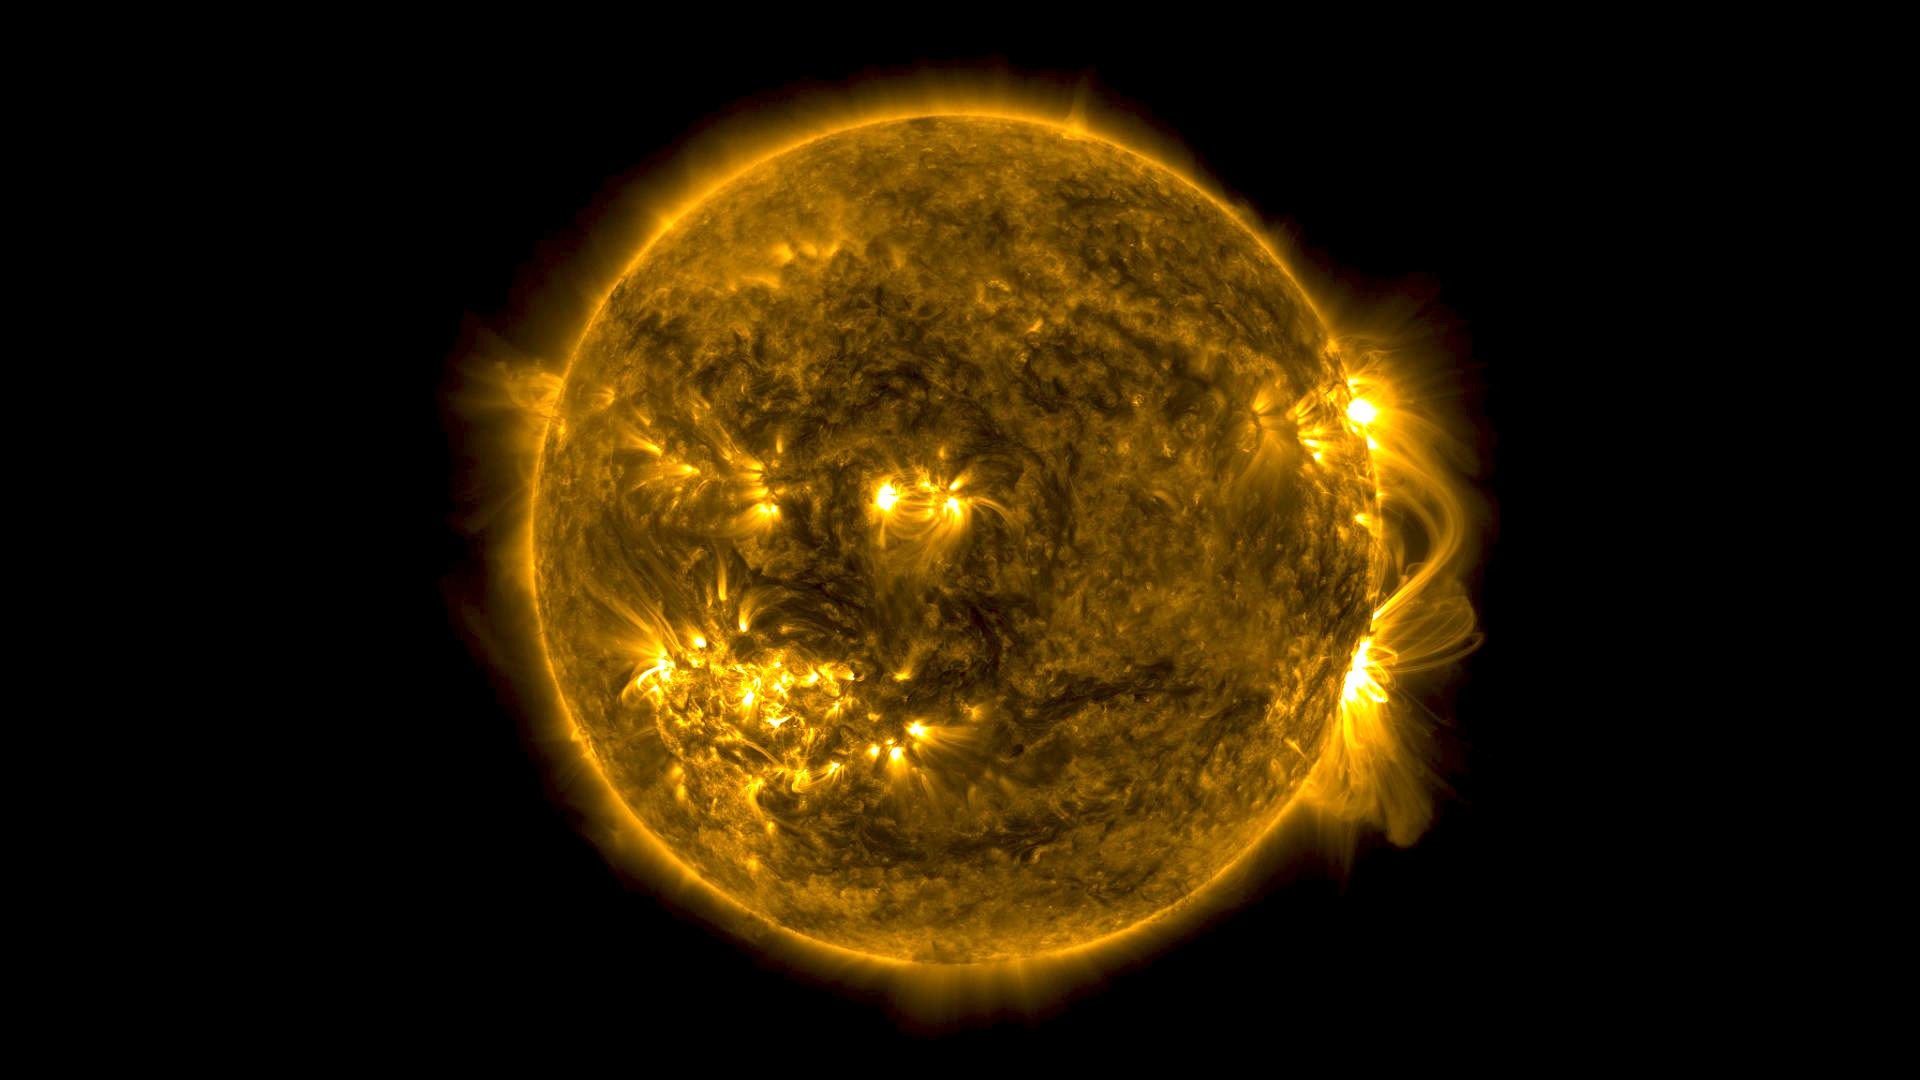 This video shows the sun in the 171 angstrom wavelength of extreme ultraviolet light.  It covers a time period of June 2, 2010 to April 15, 2013 at a cadence of one frame per day.  Early in the sequence, SDO's coverage was intermittent, so not every day is represented.  171 angstrom light highlights material around 600,000 Kelvin and shows features in the upper transition region and quiet corona of the sun.